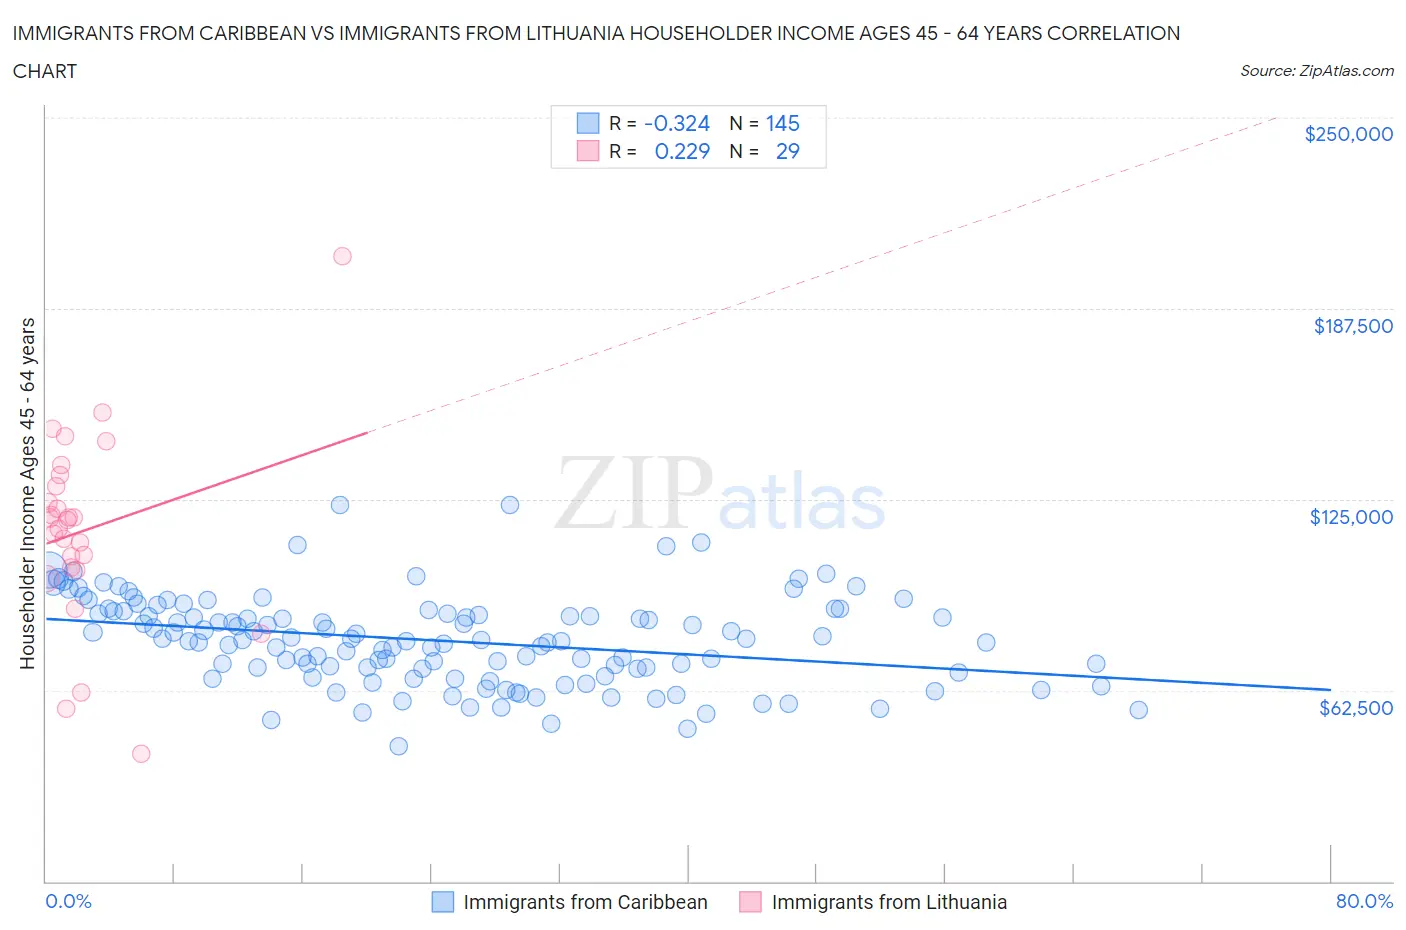 Immigrants from Caribbean vs Immigrants from Lithuania Householder Income Ages 45 - 64 years